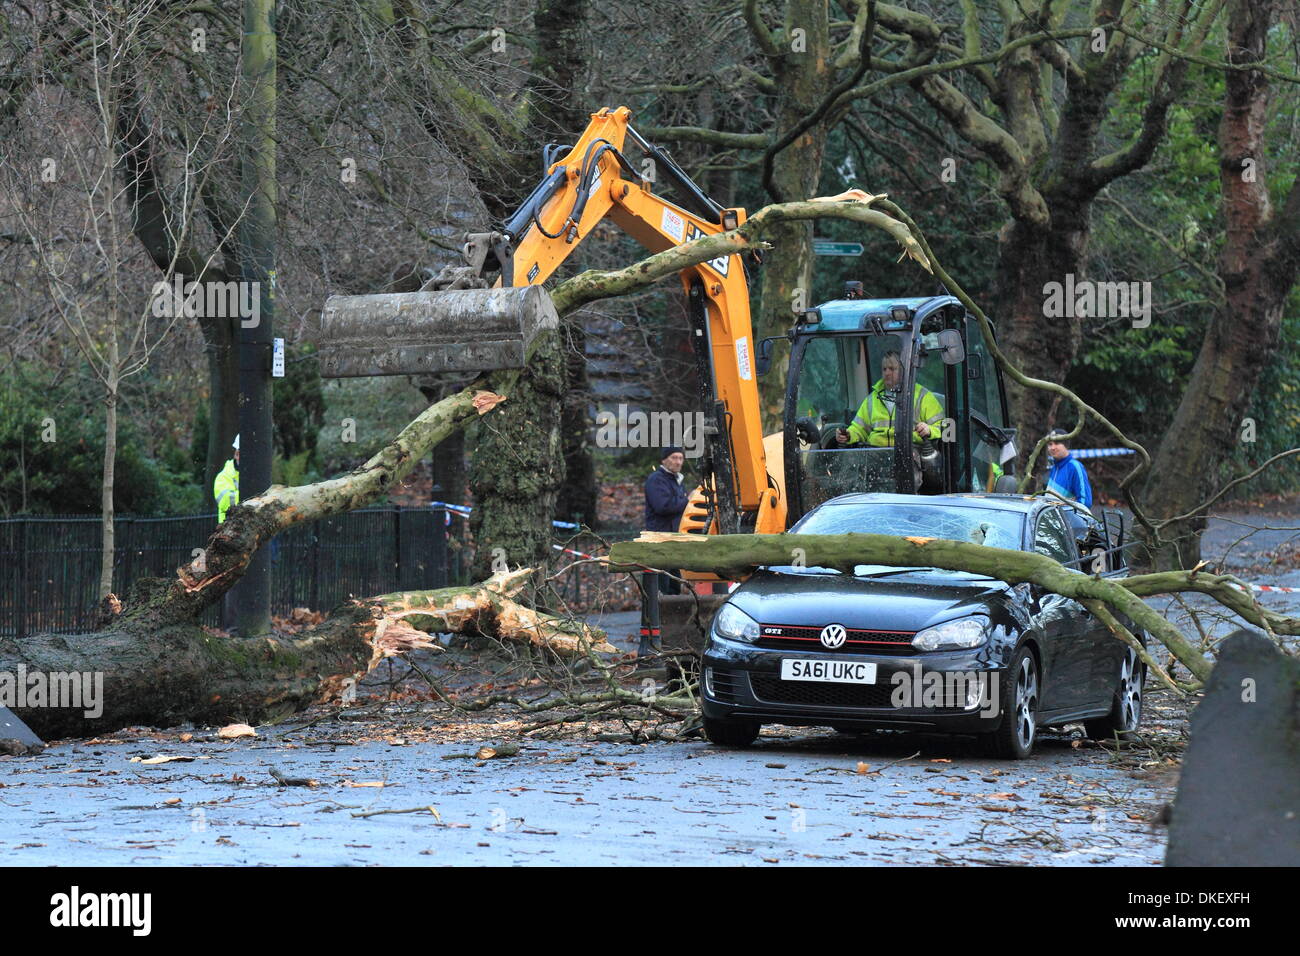 Glasgow, Scotland, UK. 5th Dec 2013. Fallen tree crushes VW Golf as it drives by. Emergency Services in attendance clearing the tree and debris. Paul Stewart/Alamy News Stock Photo